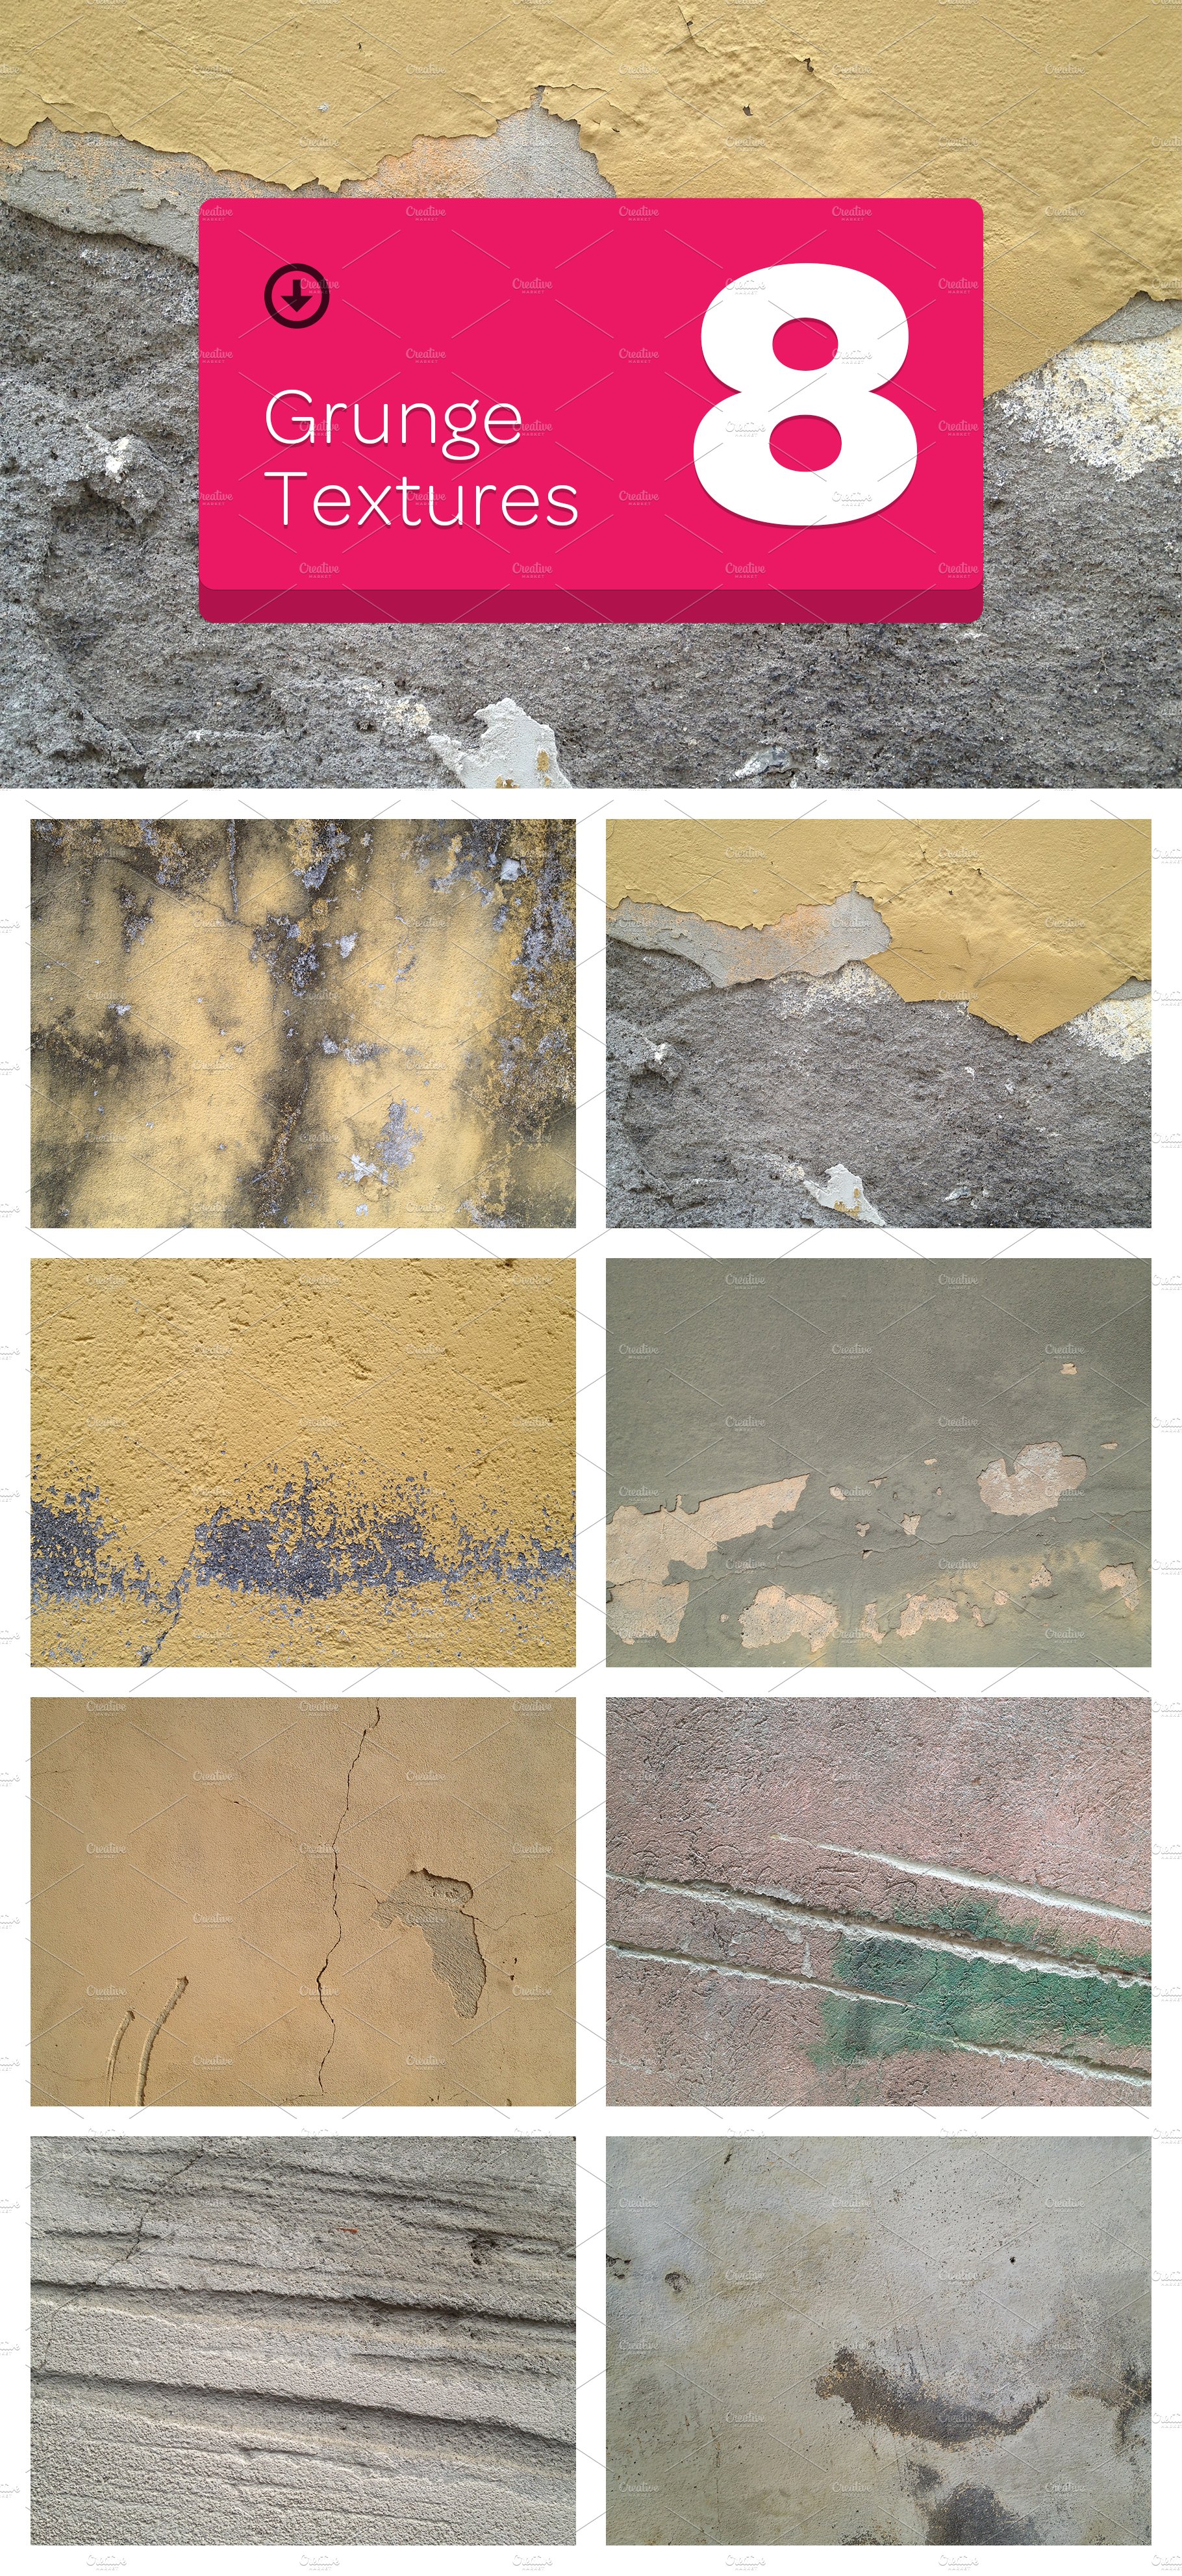 8 Grunge Textures cover image.